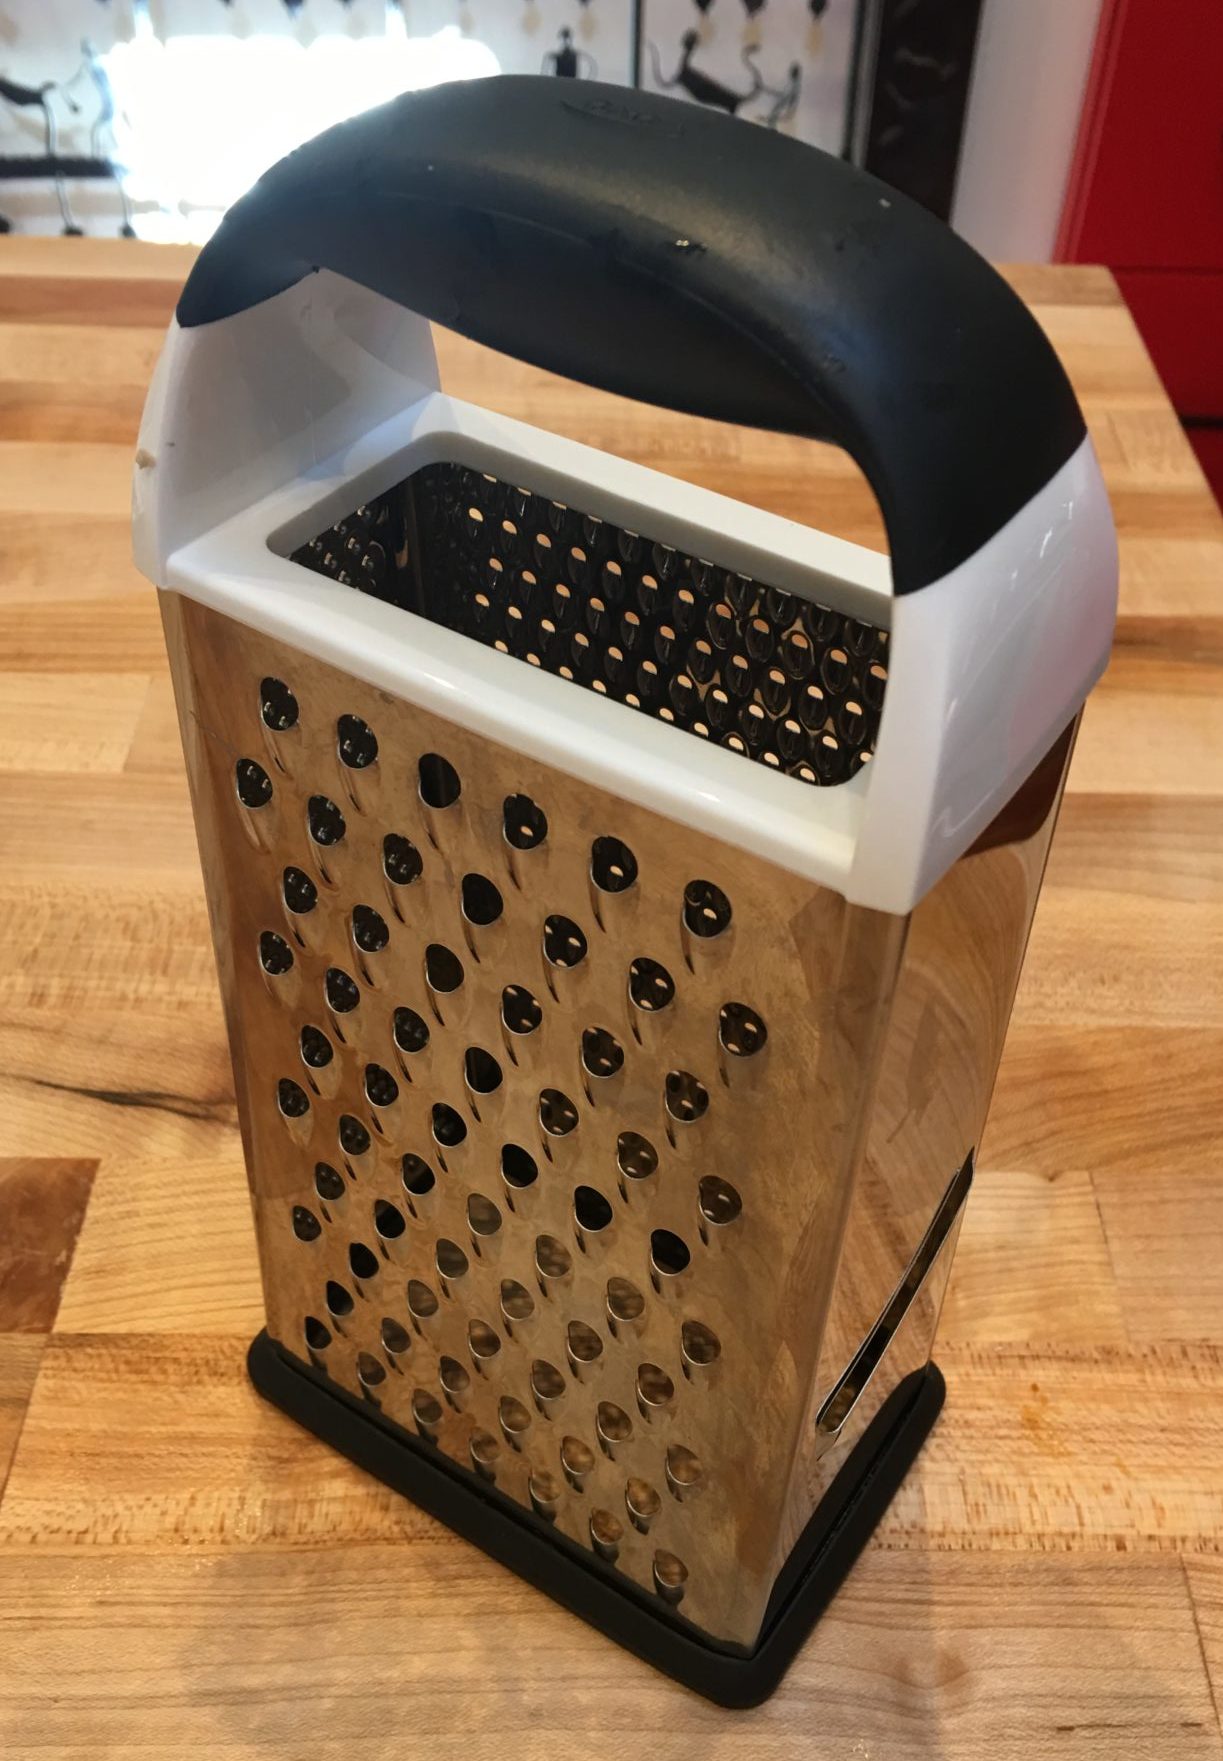 Cheese grater